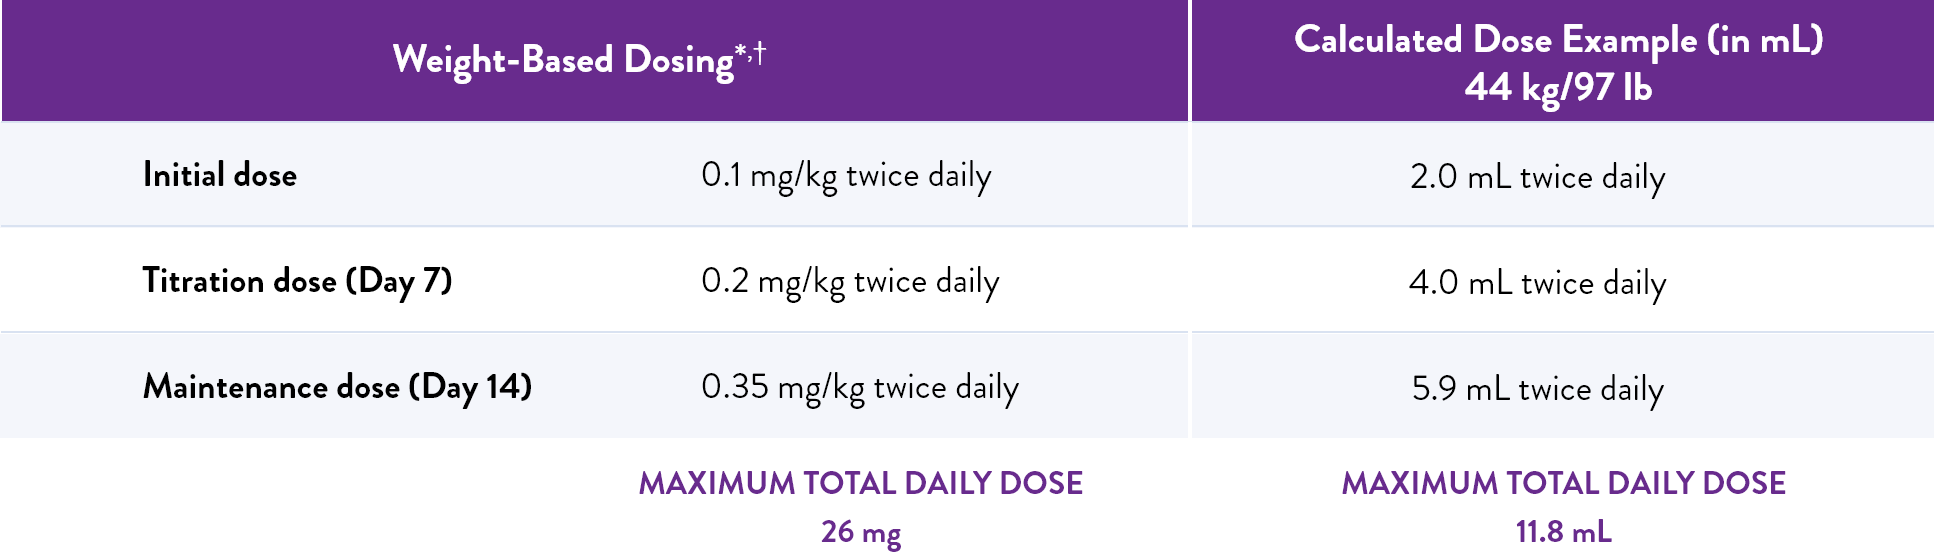 A table showing the recommended weight-based dosing of FINTEPLA®.